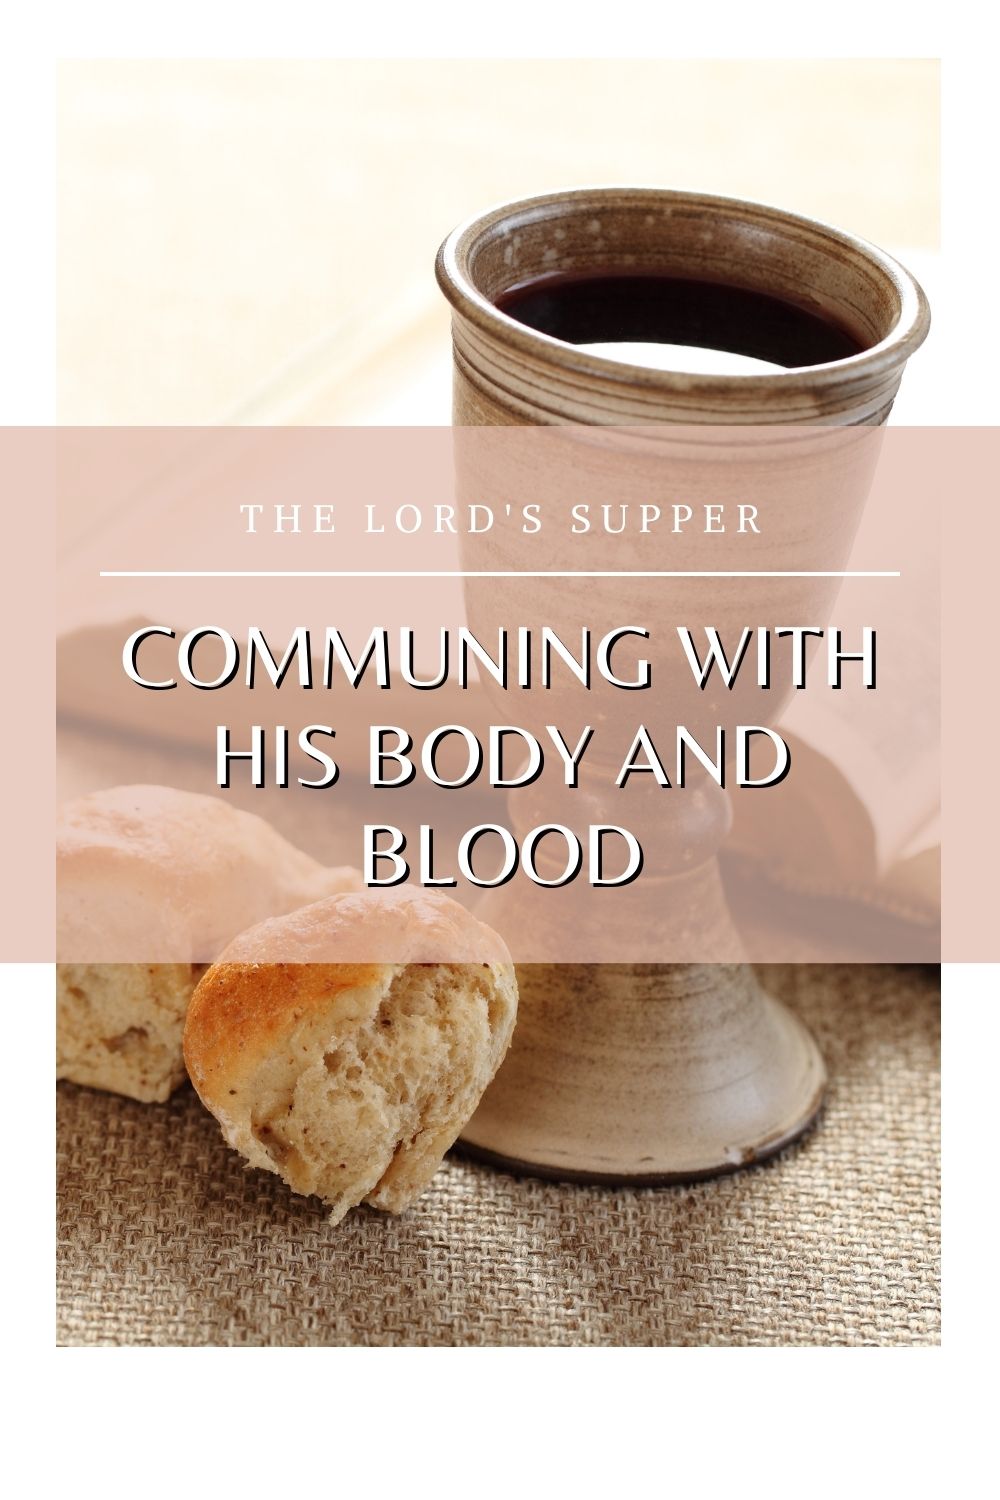 Communing with His Body and Blood